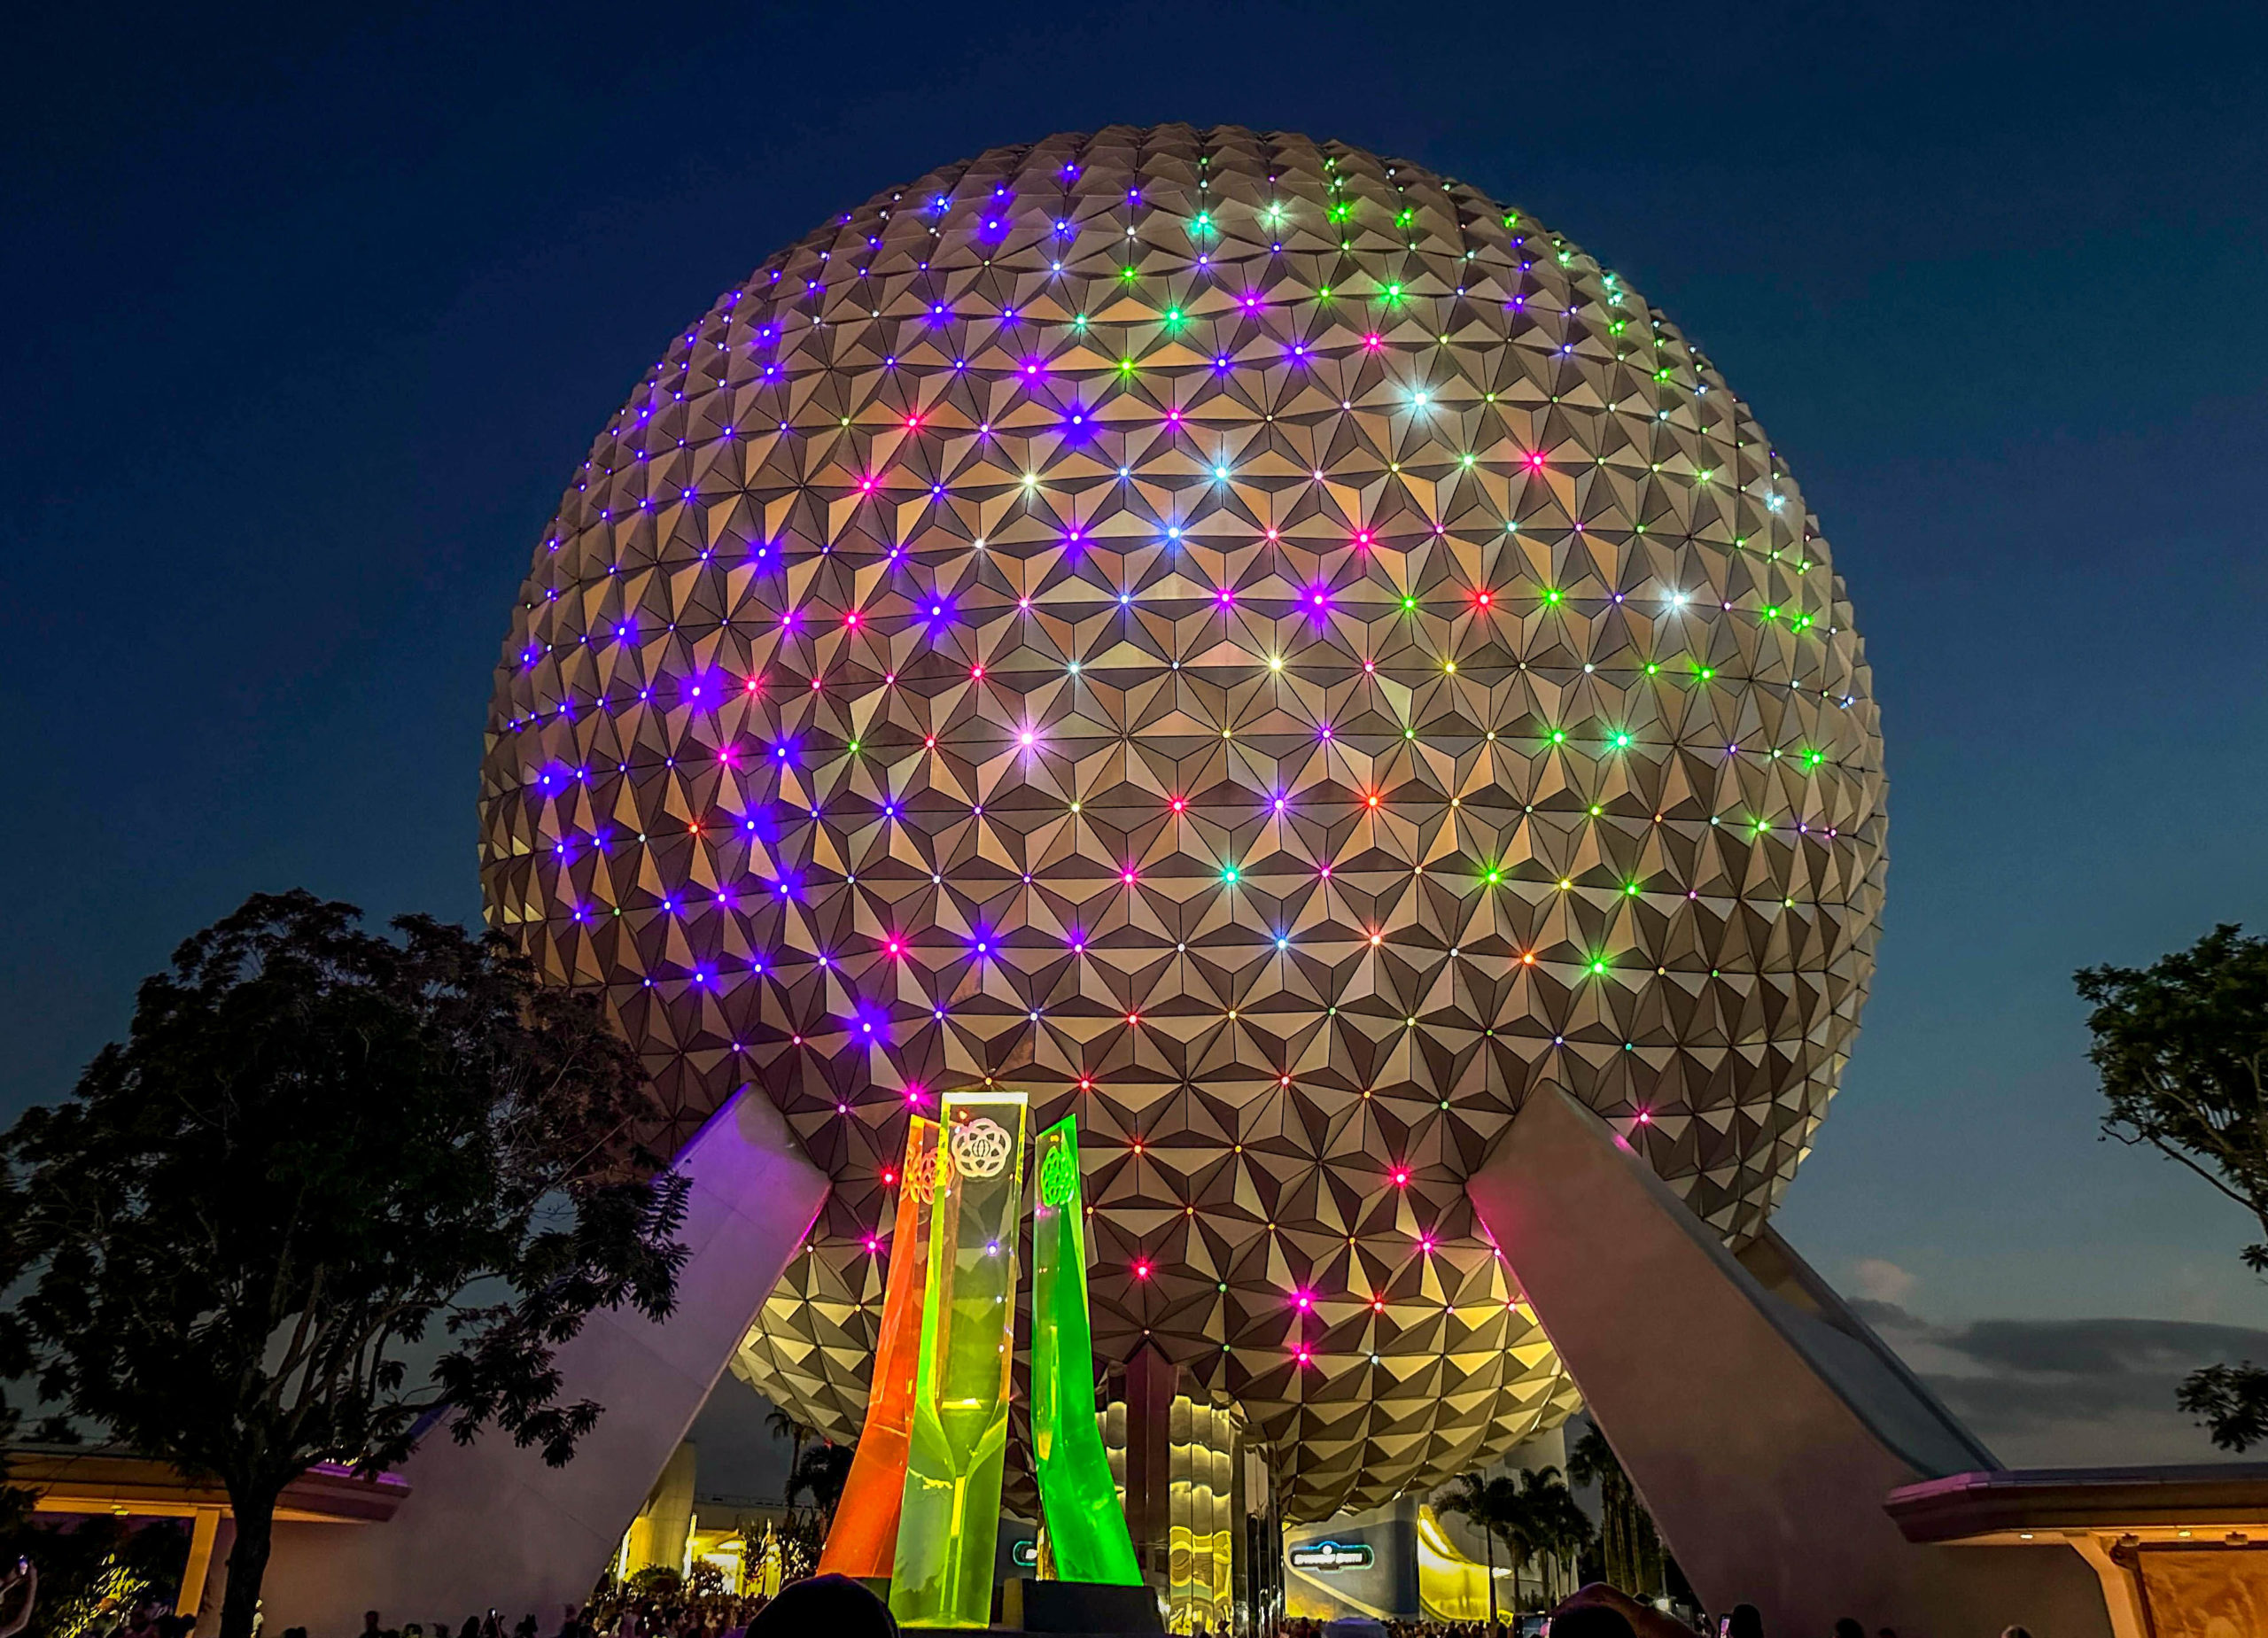 Spaceship Earth in EPCOT